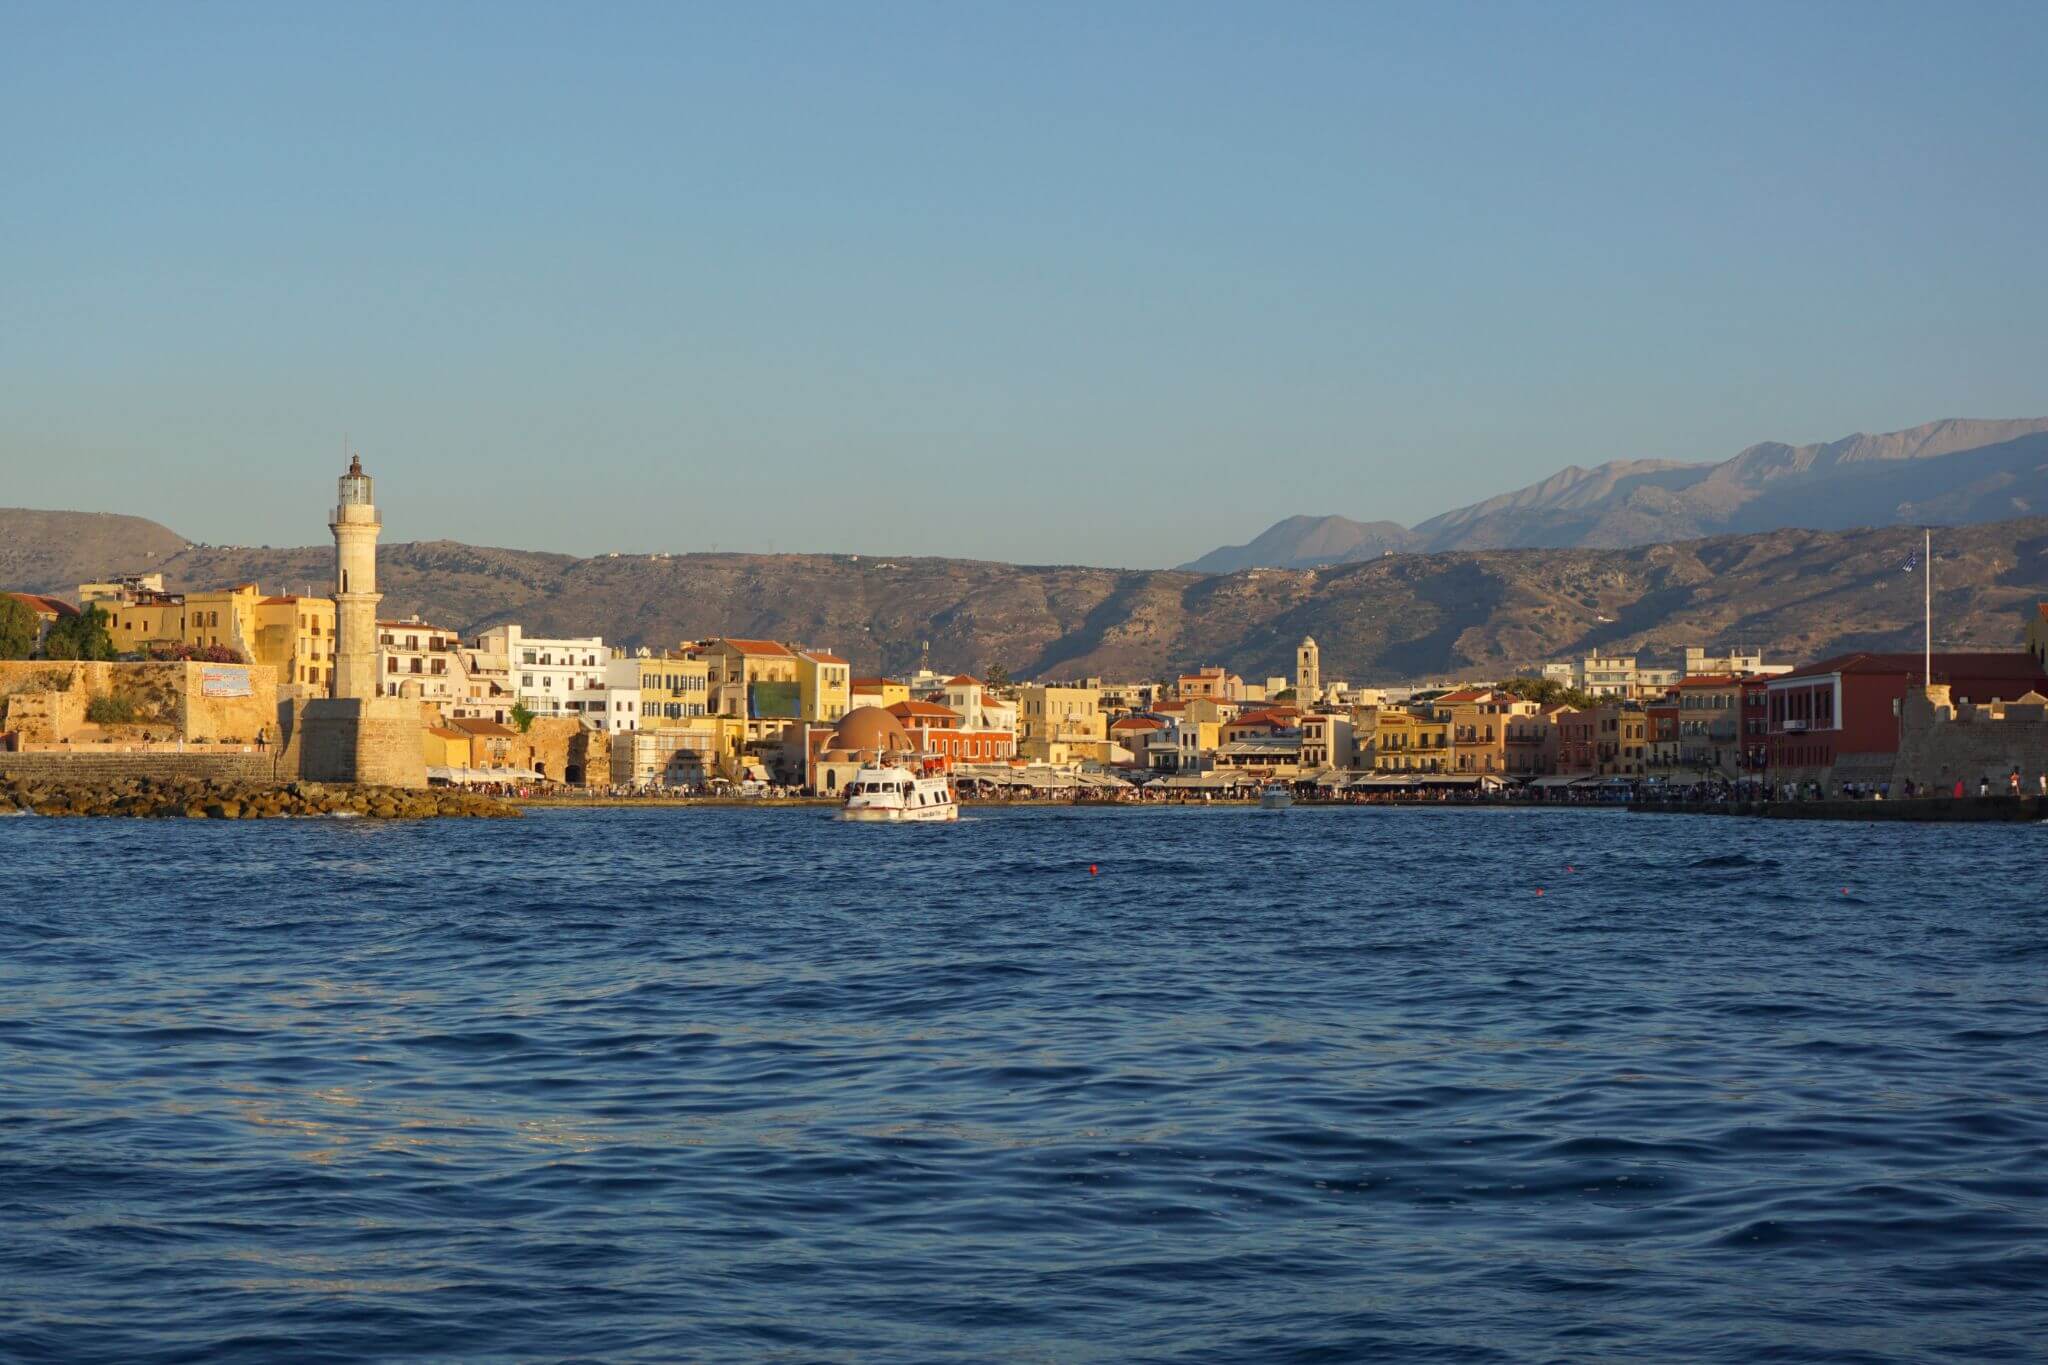 View from the sunset boat tour of Chania Old Harbour